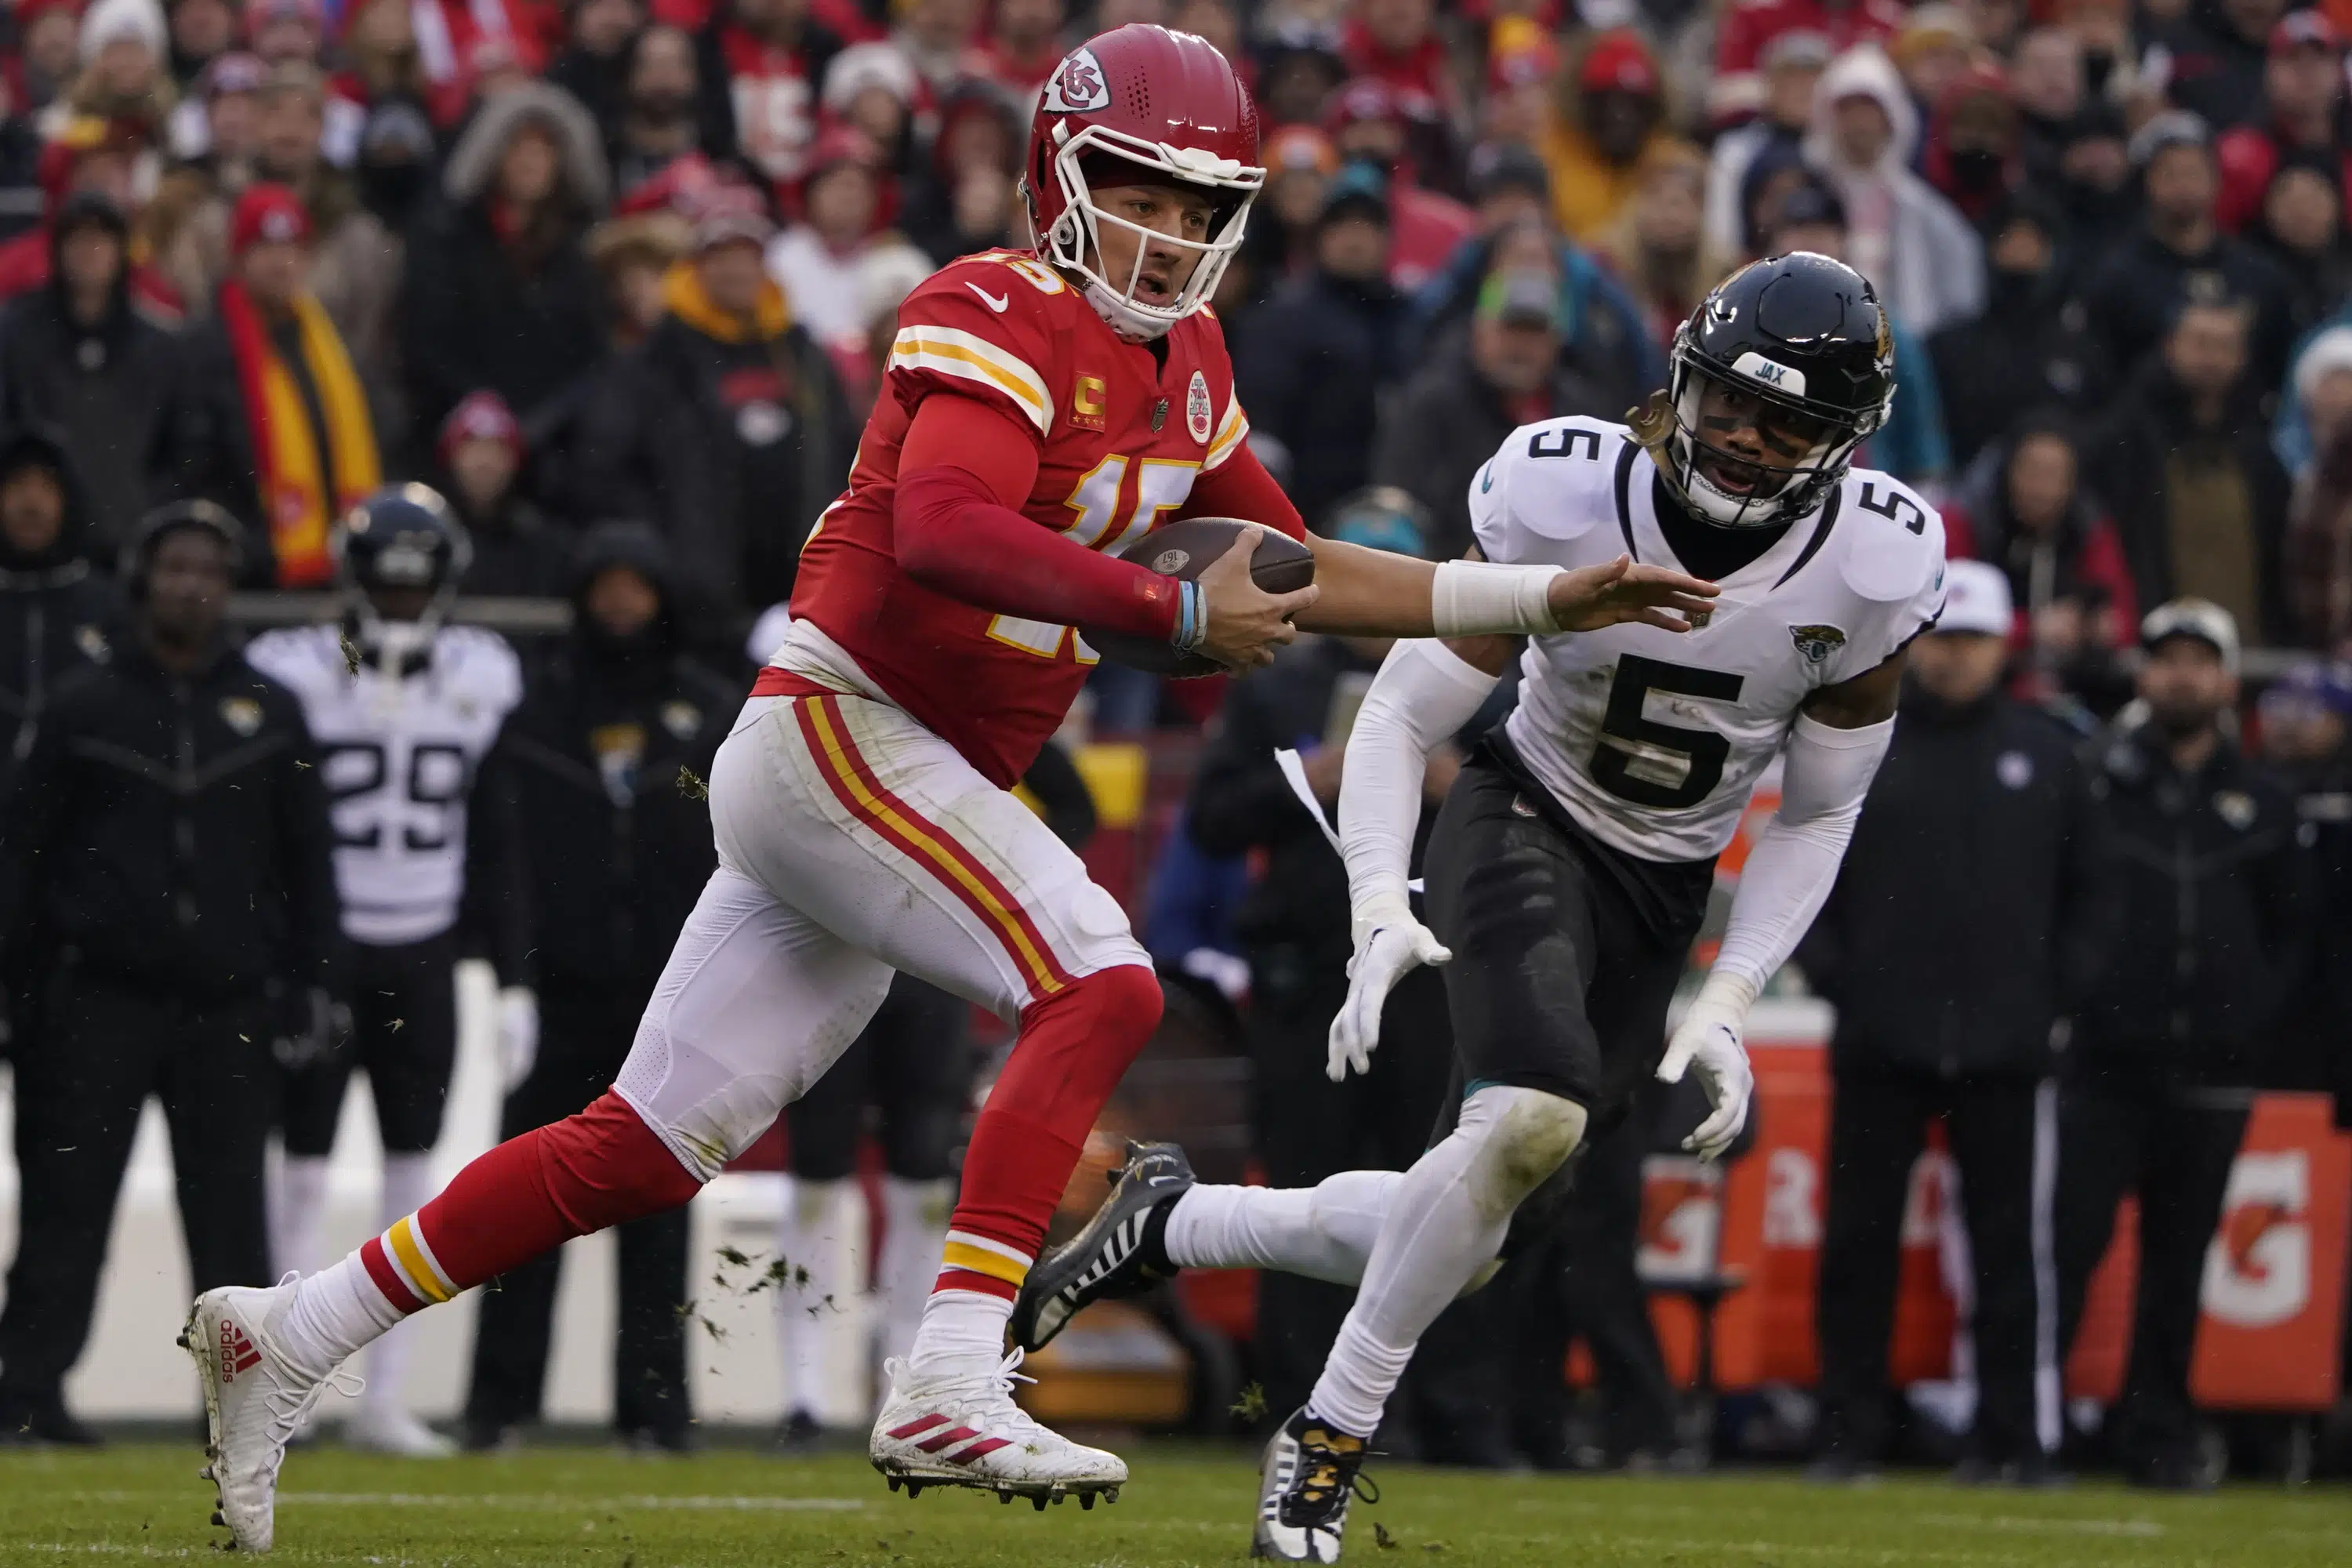 Chiefs, led by hobbled Mahomes, beat Jags 27-20 in playoffs | AP News